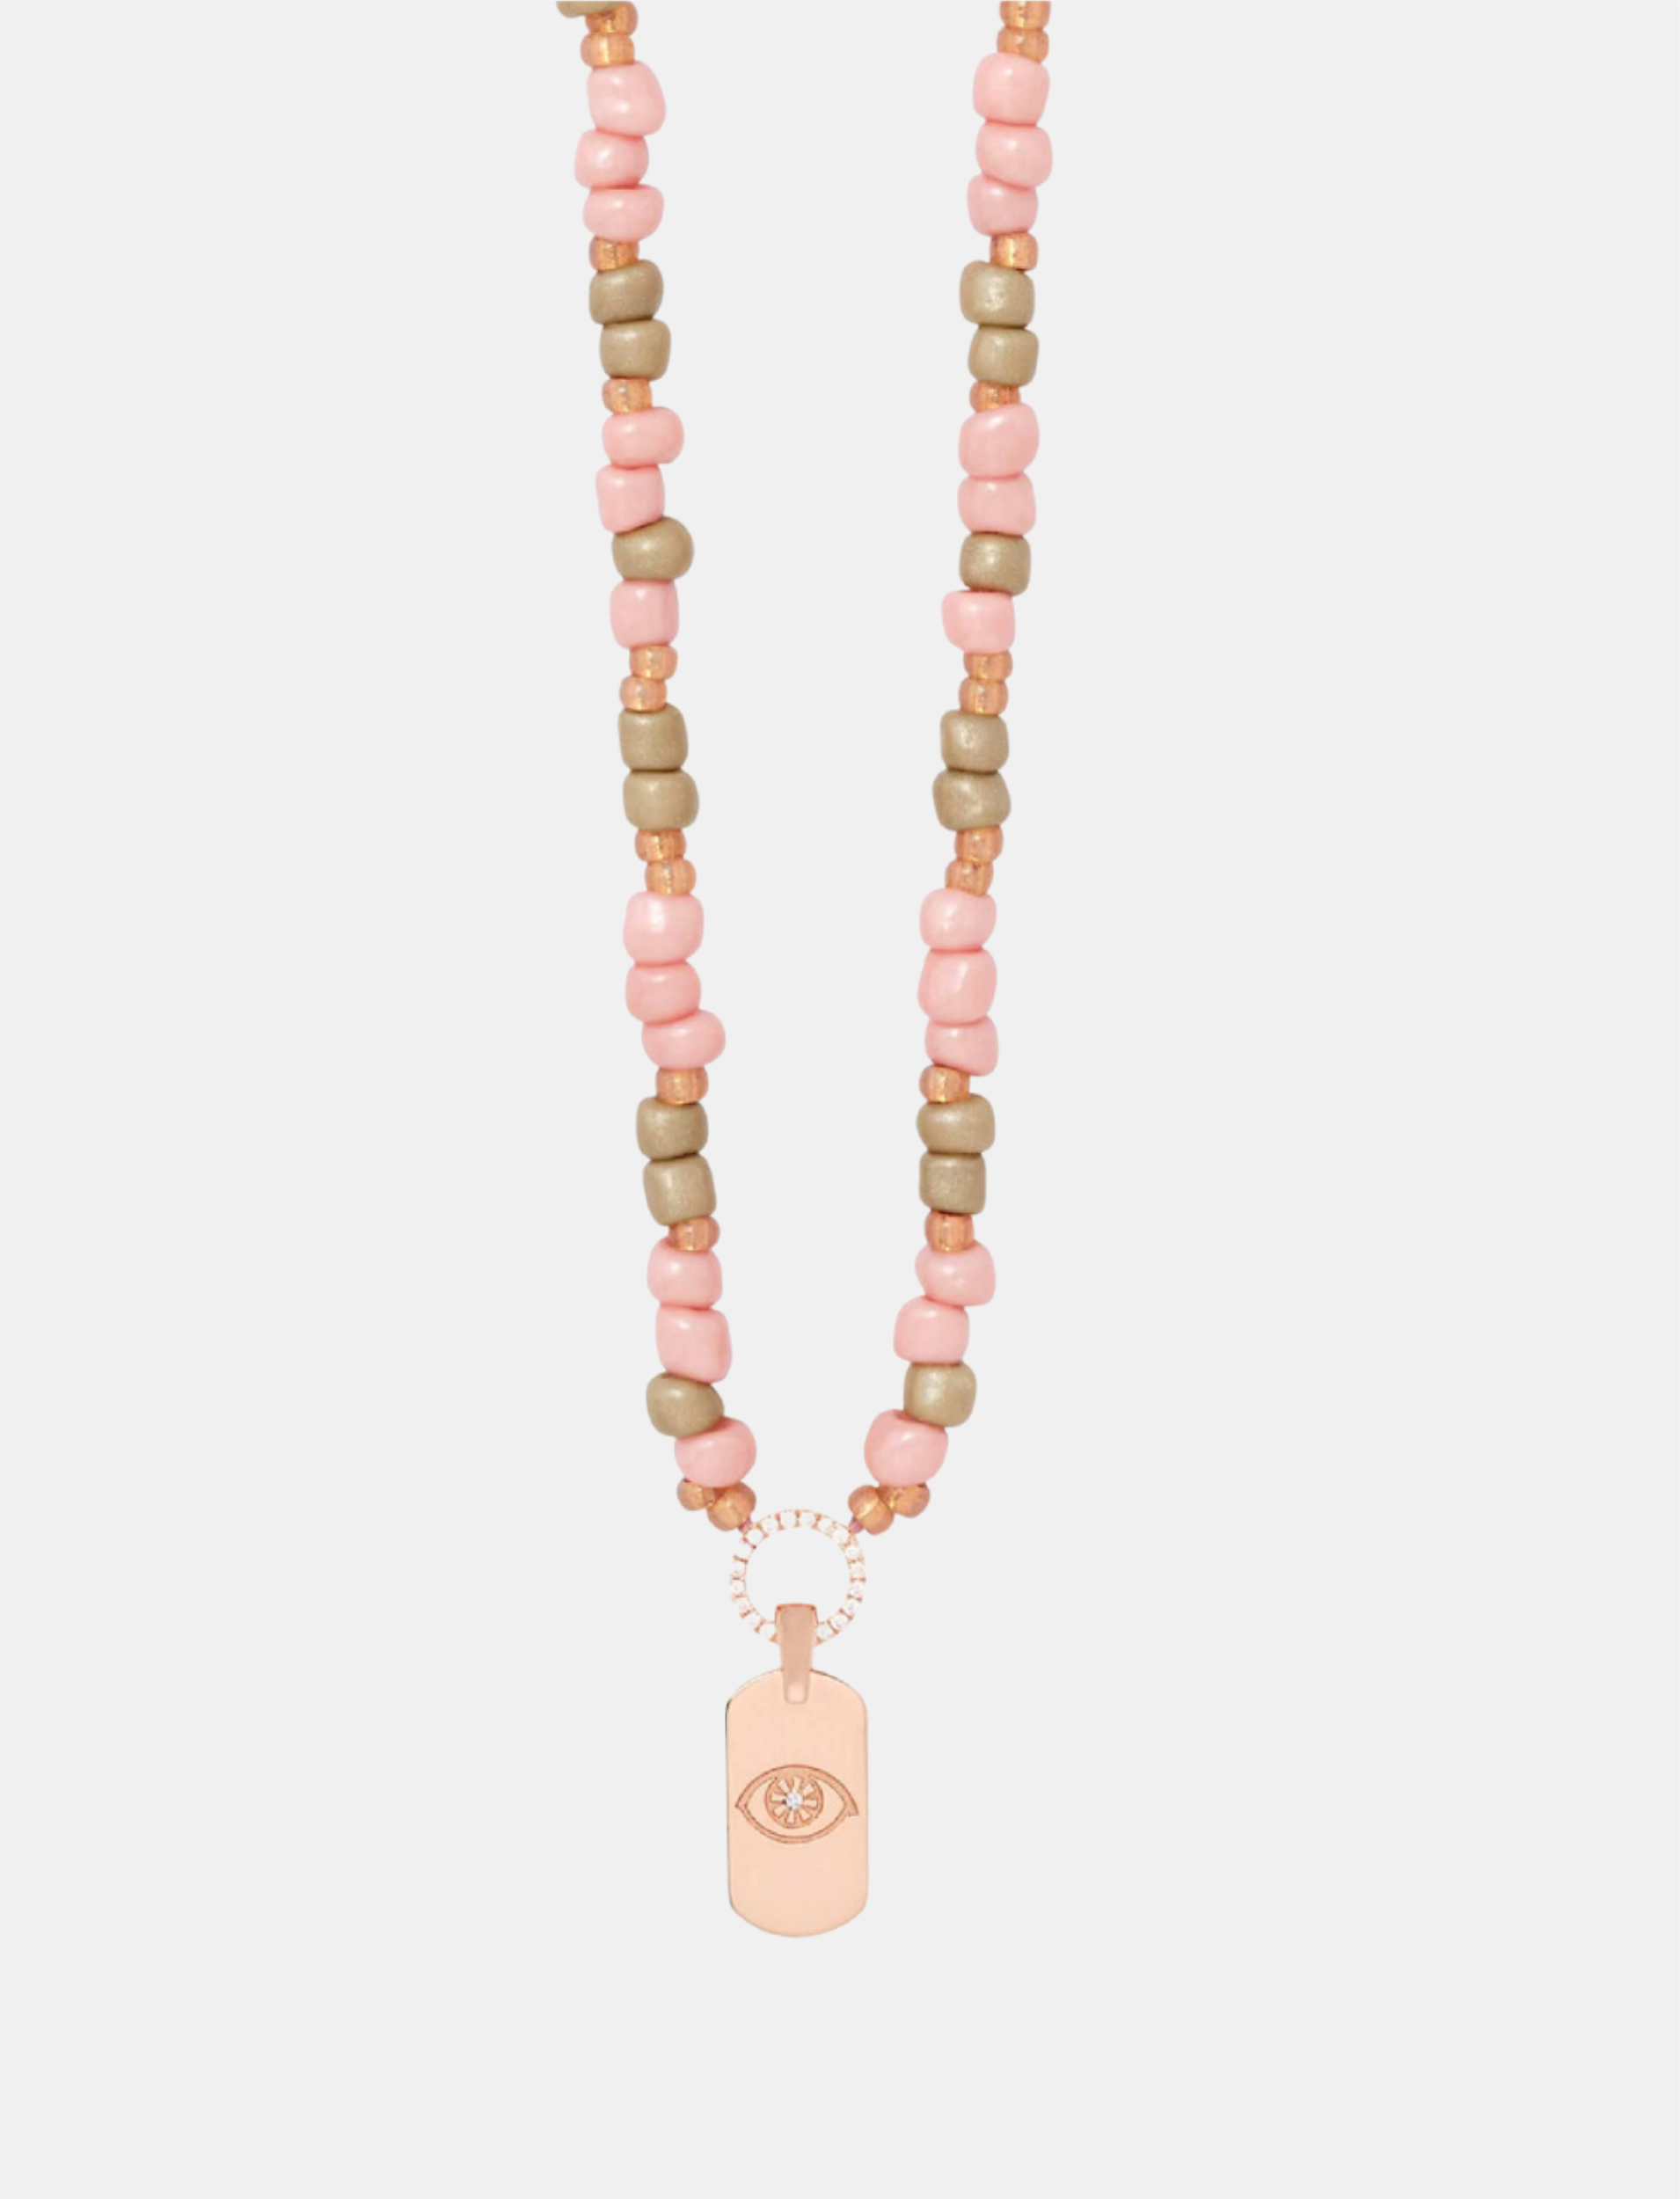 Dusty Pink Beaded Necklace with Tag Pendant